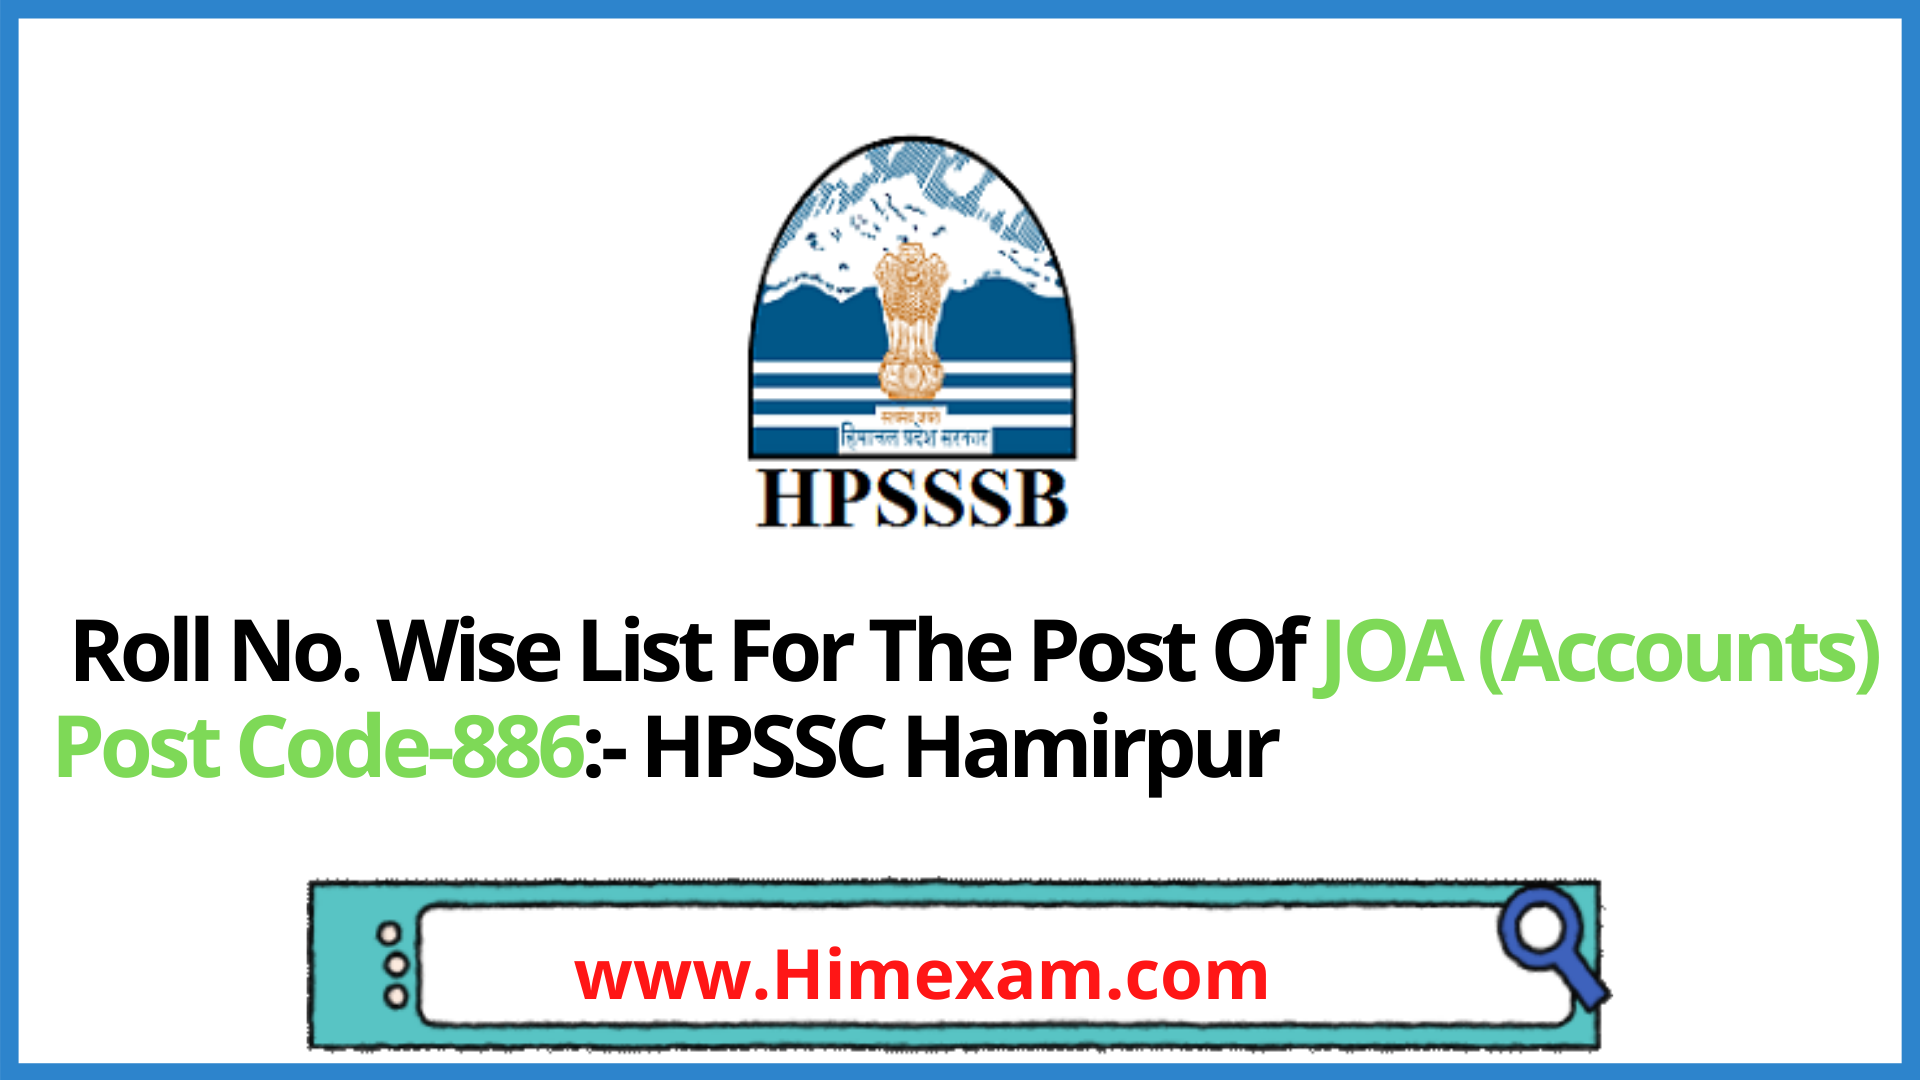 Roll No. Wise List For The Post Of JOA (Accounts) Post Code-886:- HPSSC Hamirpur